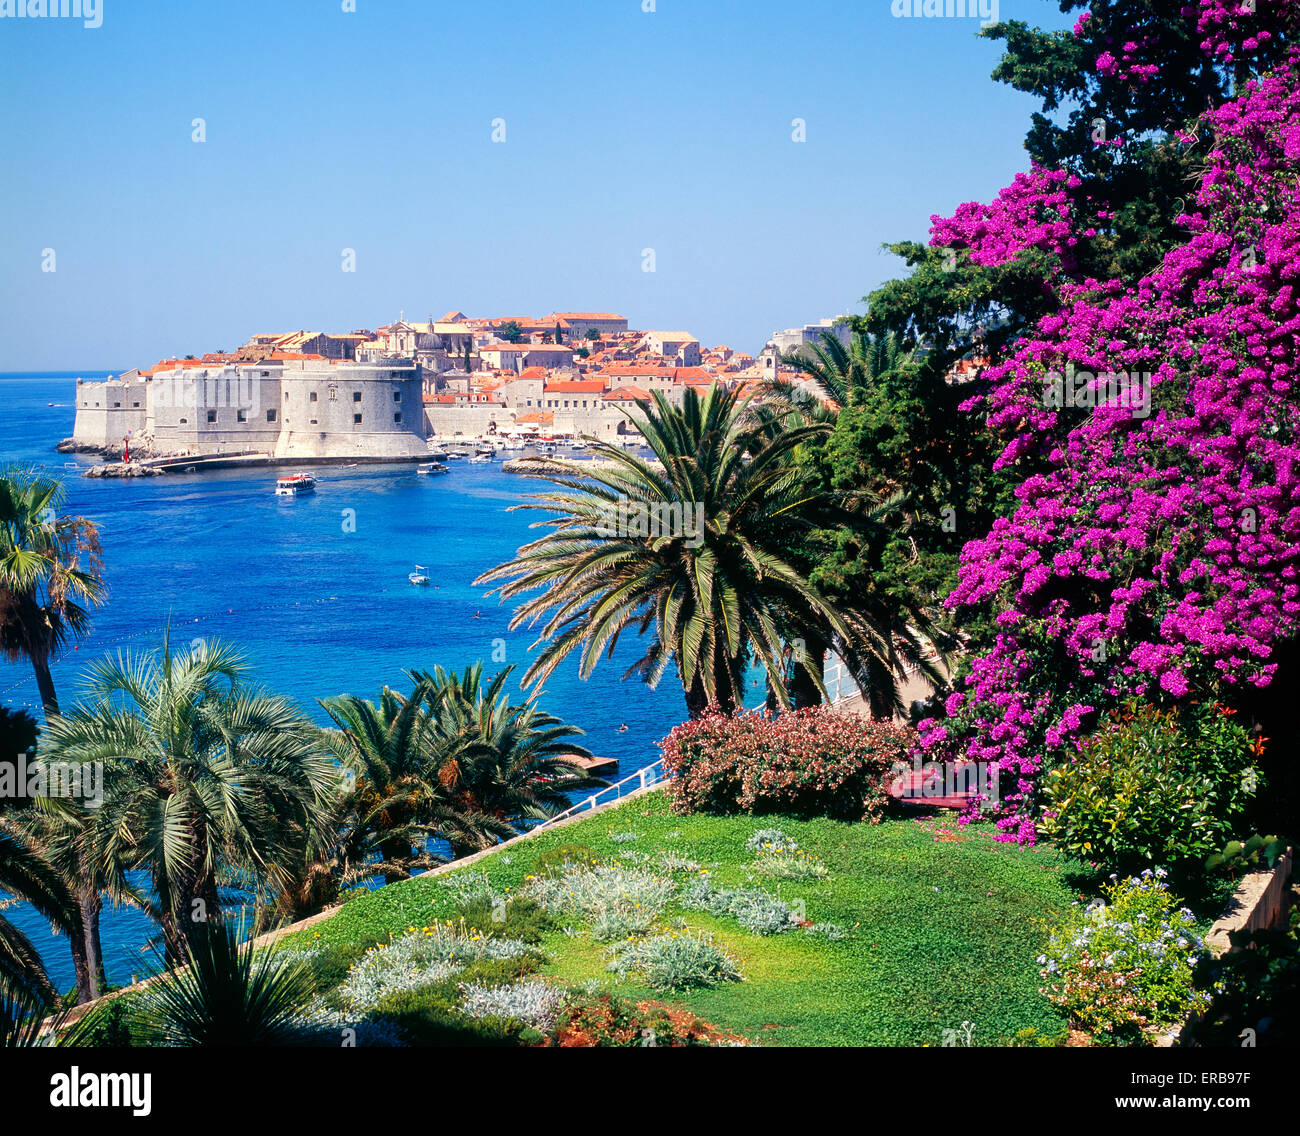 Dubrovnik old town with flowers, Croatia Stock Photo